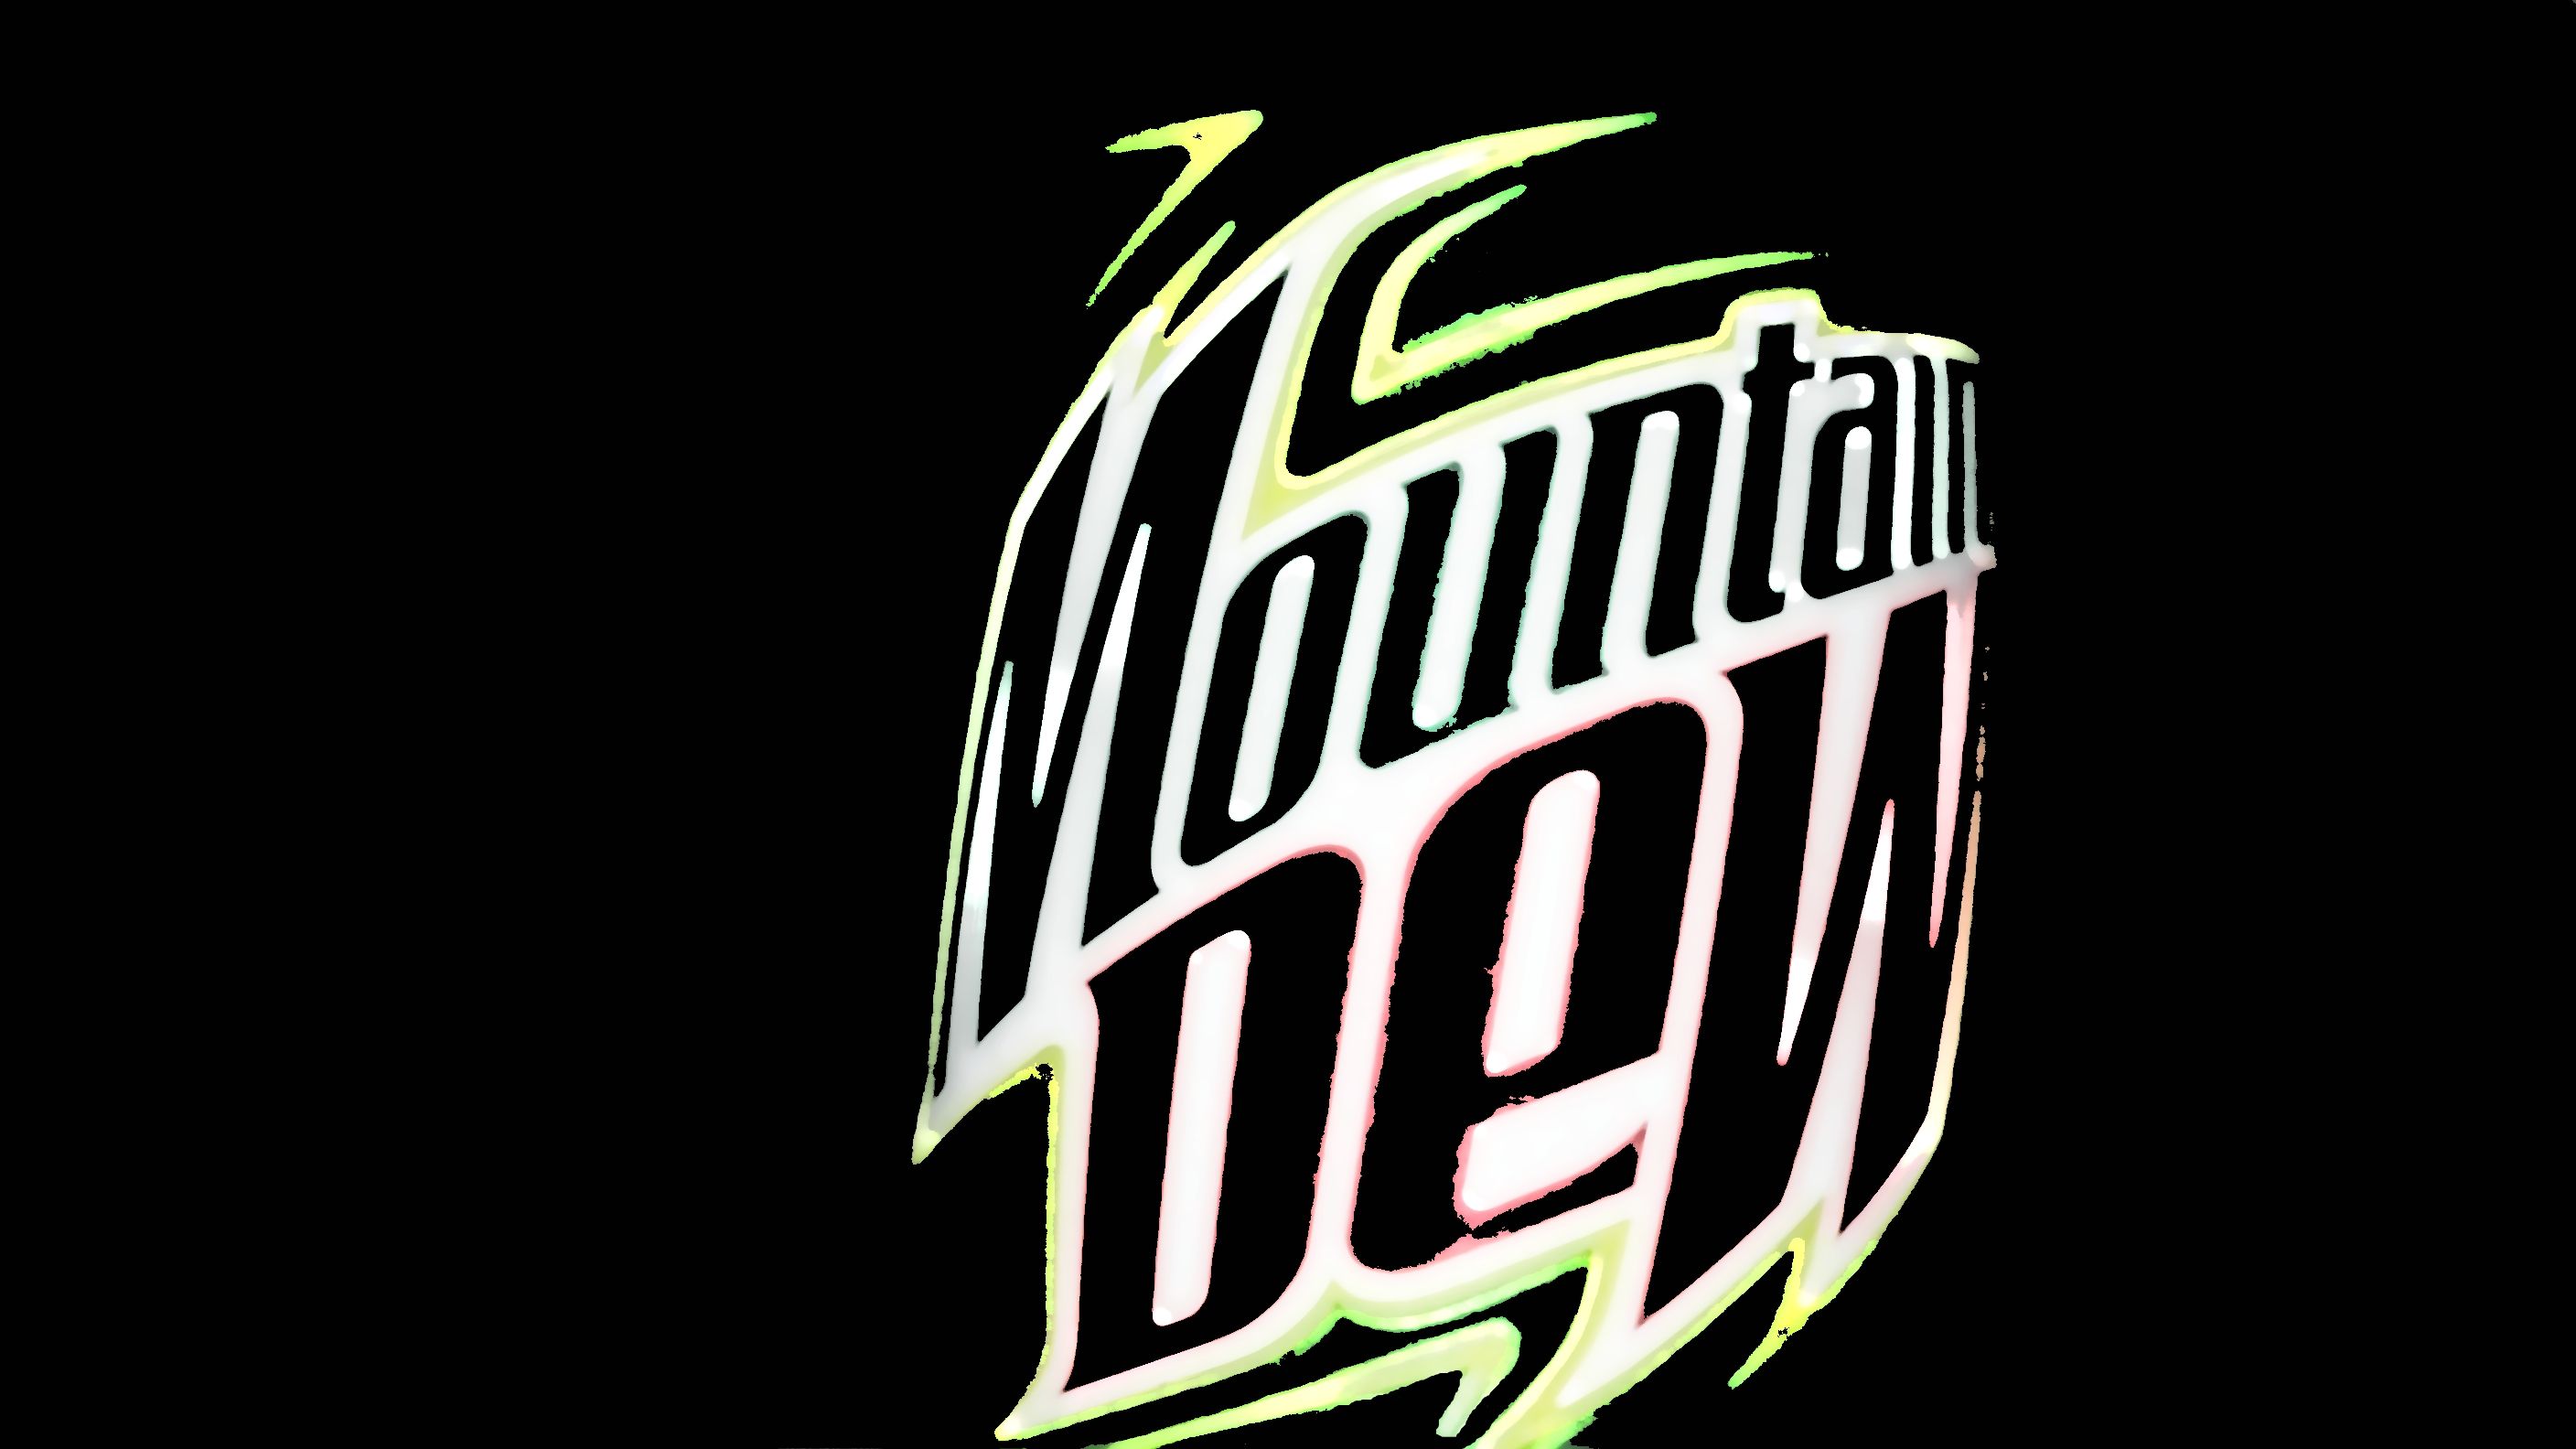 Mountain dew wallpaper by Decapitations on DeviantArt